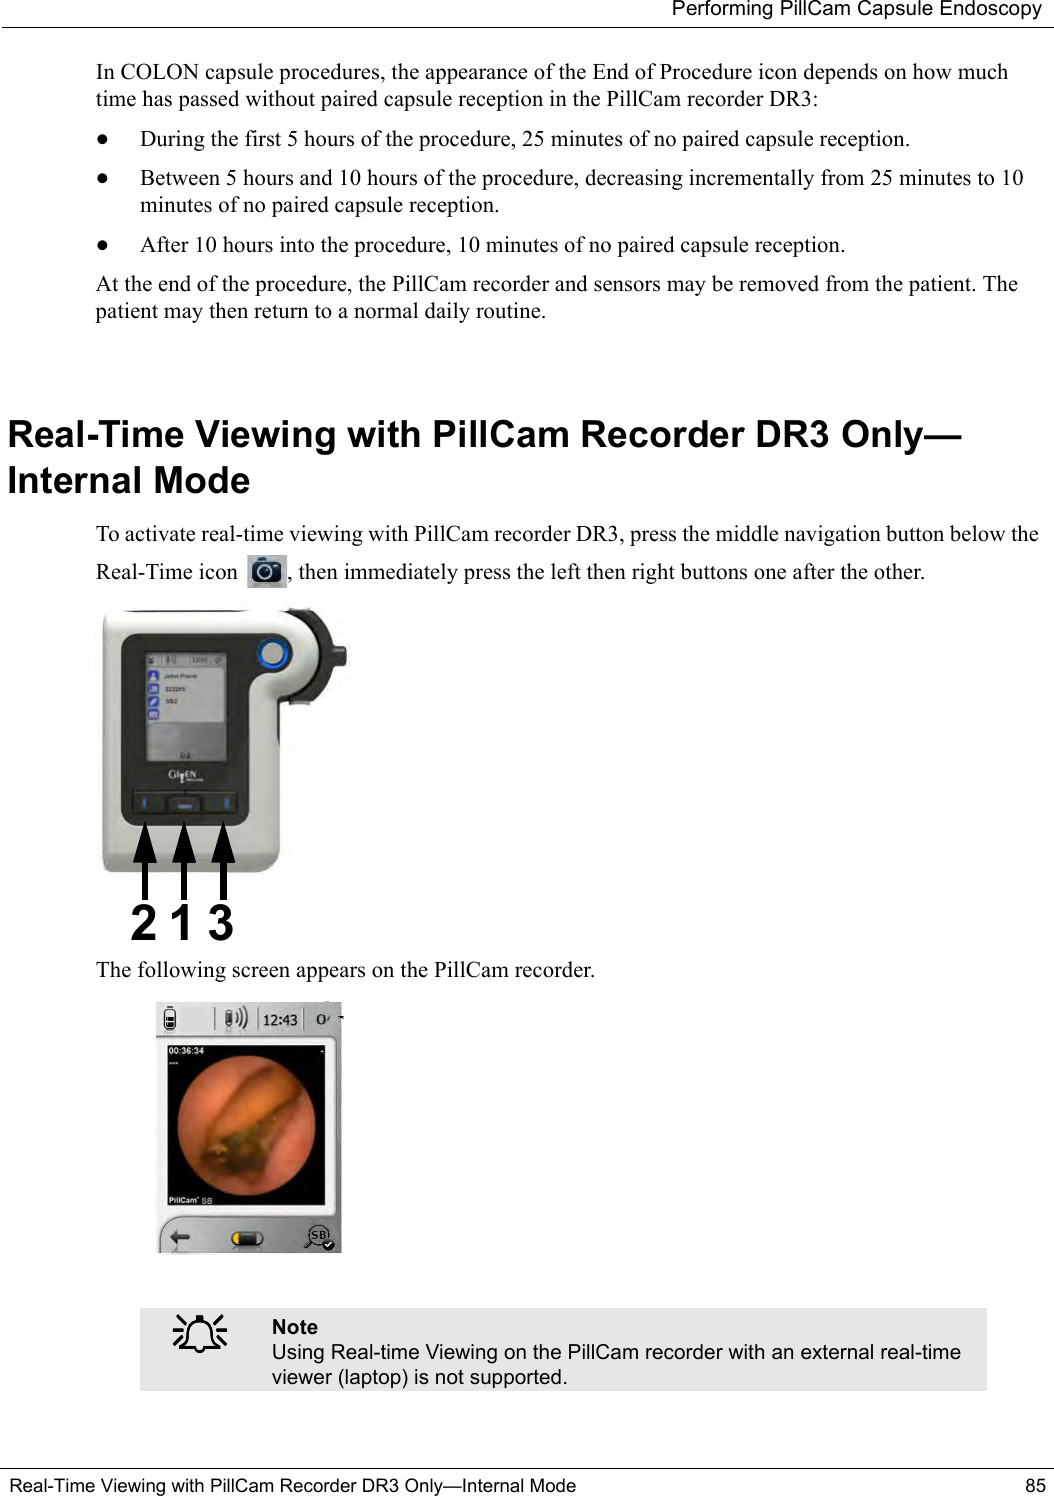 Performing PillCam Capsule EndoscopyReal-Time Viewing with PillCam Recorder DR3 Only—Internal Mode 85In COLON capsule procedures, the appearance of the End of Procedure icon depends on how much time has passed without paired capsule reception in the PillCam recorder DR3:•During the first 5 hours of the procedure, 25 minutes of no paired capsule reception.•Between 5 hours and 10 hours of the procedure, decreasing incrementally from 25 minutes to 10 minutes of no paired capsule reception.•After 10 hours into the procedure, 10 minutes of no paired capsule reception.At the end of the procedure, the PillCam recorder and sensors may be removed from the patient. The patient may then return to a normal daily routine.Real-Time Viewing with PillCam Recorder DR3 Only—Internal ModeTo activate real-time viewing with PillCam recorder DR3, press the middle navigation button below the Real-Time icon  , then immediately press the left then right buttons one after the other.The following screen appears on the PillCam recorder. ֠֠֠֠NoteUsing Real-time Viewing on the PillCam recorder with an external real-time viewer (laptop) is not supported.1 32